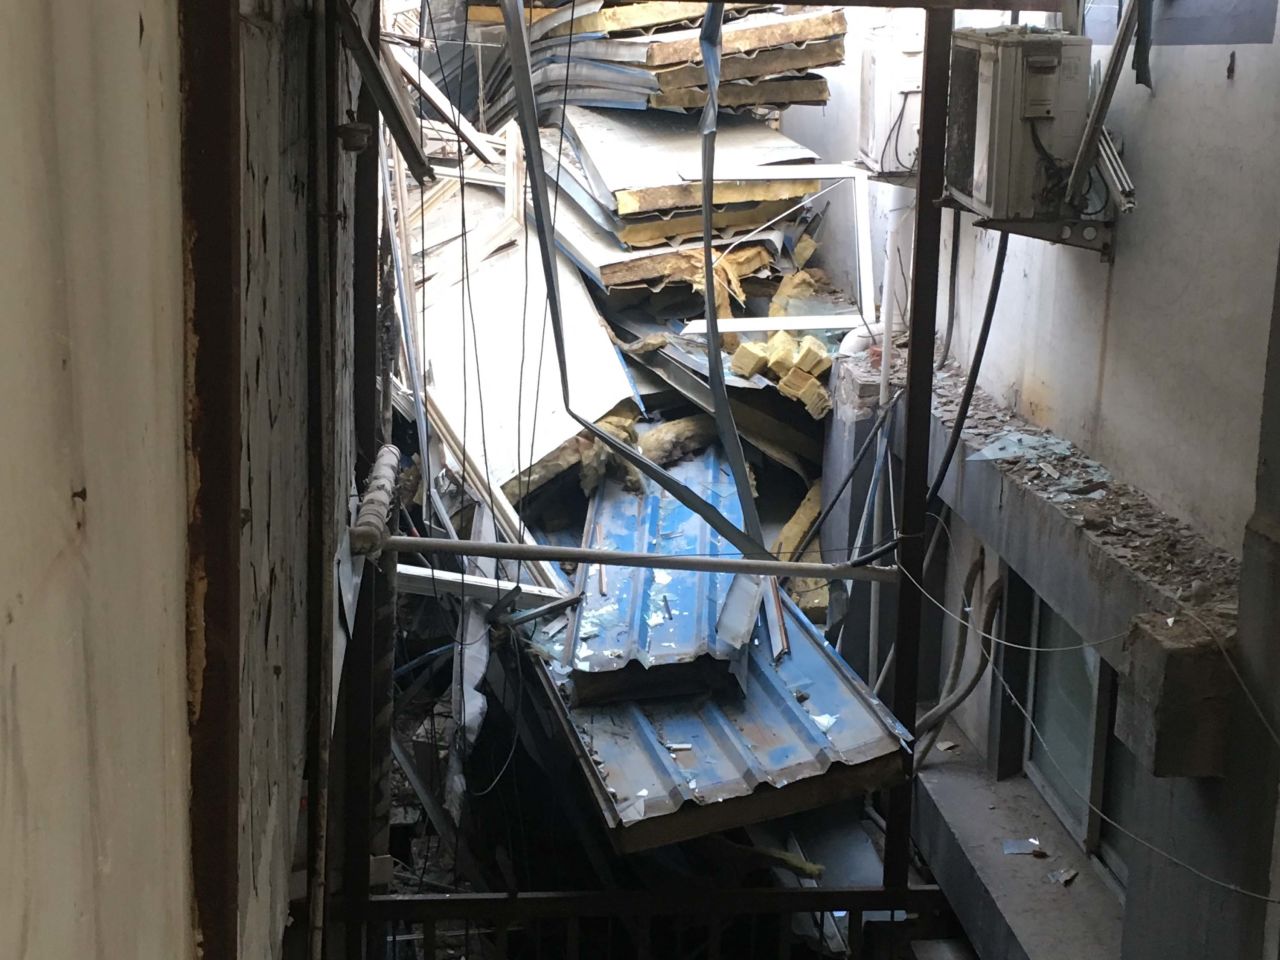 Debris from insulated ceilings and broken glass is seen littering floors of a building after demolition crews forced the eviction of migrant workers.